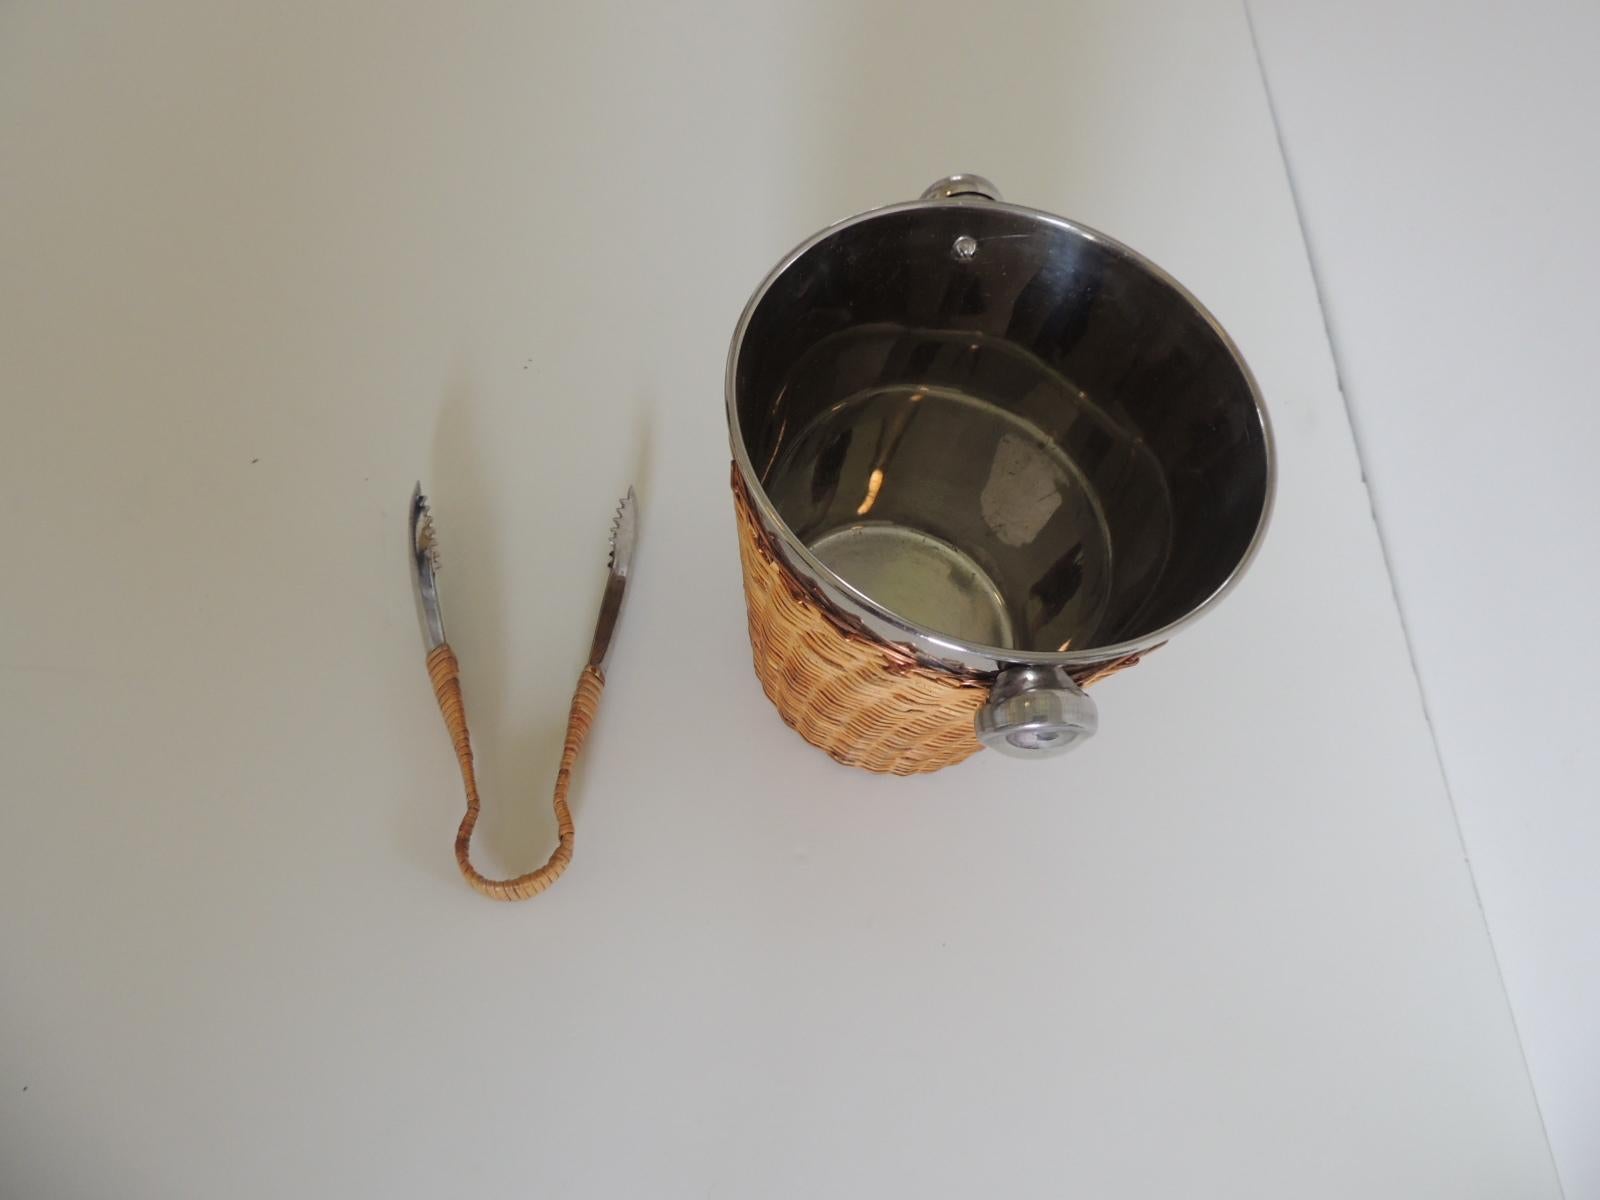 Small chrome and rattan ice bucket with round handles and ice thongs.
Rattan woven with copper wires and the thong is also wrapped in the rattan.
Size: 7